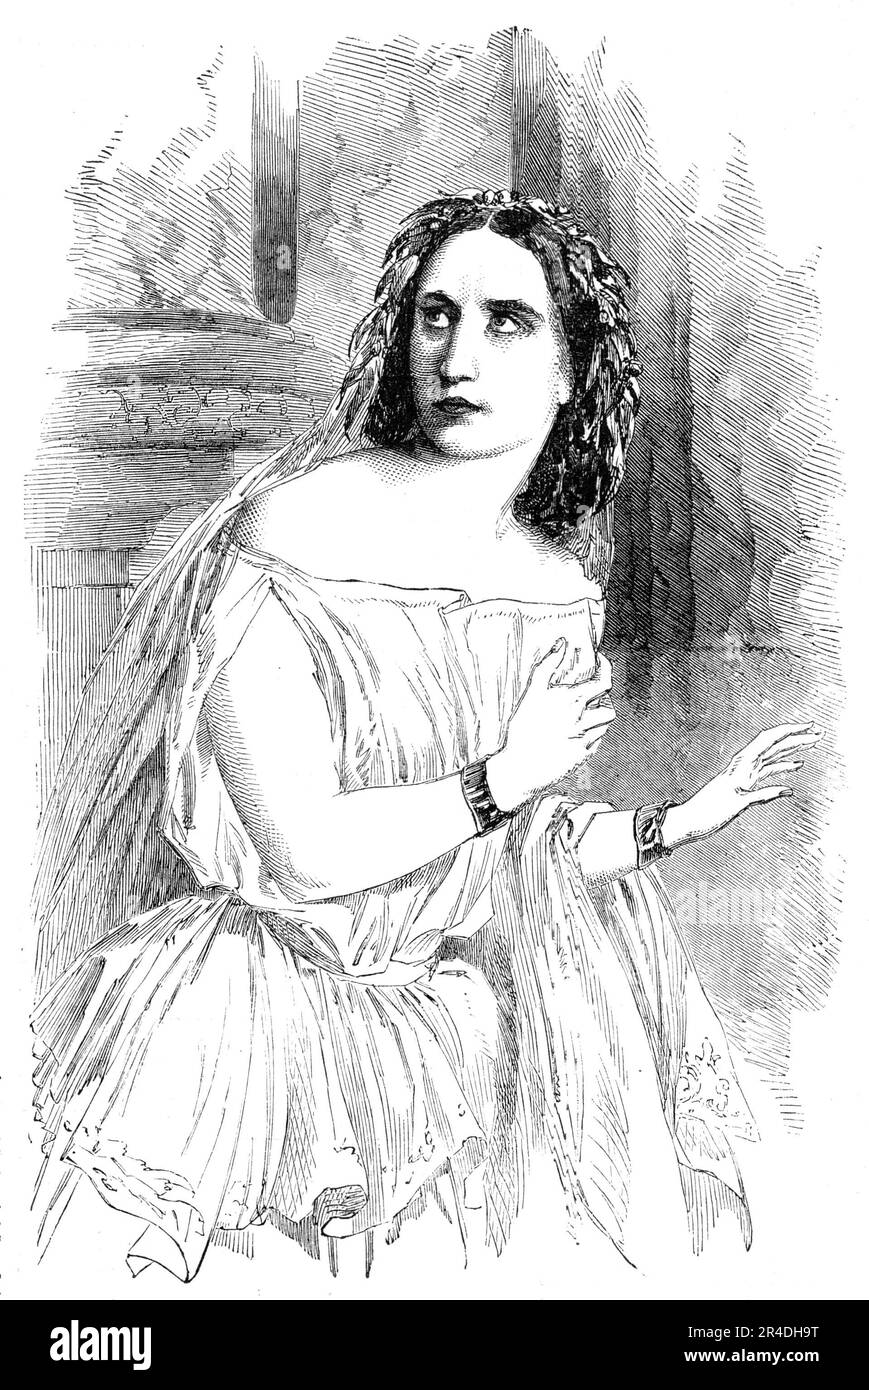 Madame Ristori, at the Lyceum Theatre, 1856. Italian actress in London stage production. 'She...has the advantage of youth and superior beauty. Lamartine, indeed, describes her as &quot;naturally and mentally beautiful;&quot; to which an English critic adds - &quot;a tall commanding figure, features cast in the finest mould of classic beauty, a deep blue eye, so expressive as scarcely to require the aid of a voice which, without being loud, seems to have every feeling and passion upon its scale&quot;. Such are Nature's gifts to Madame Ristori for the theatre. The English public, however, have Stock Photo